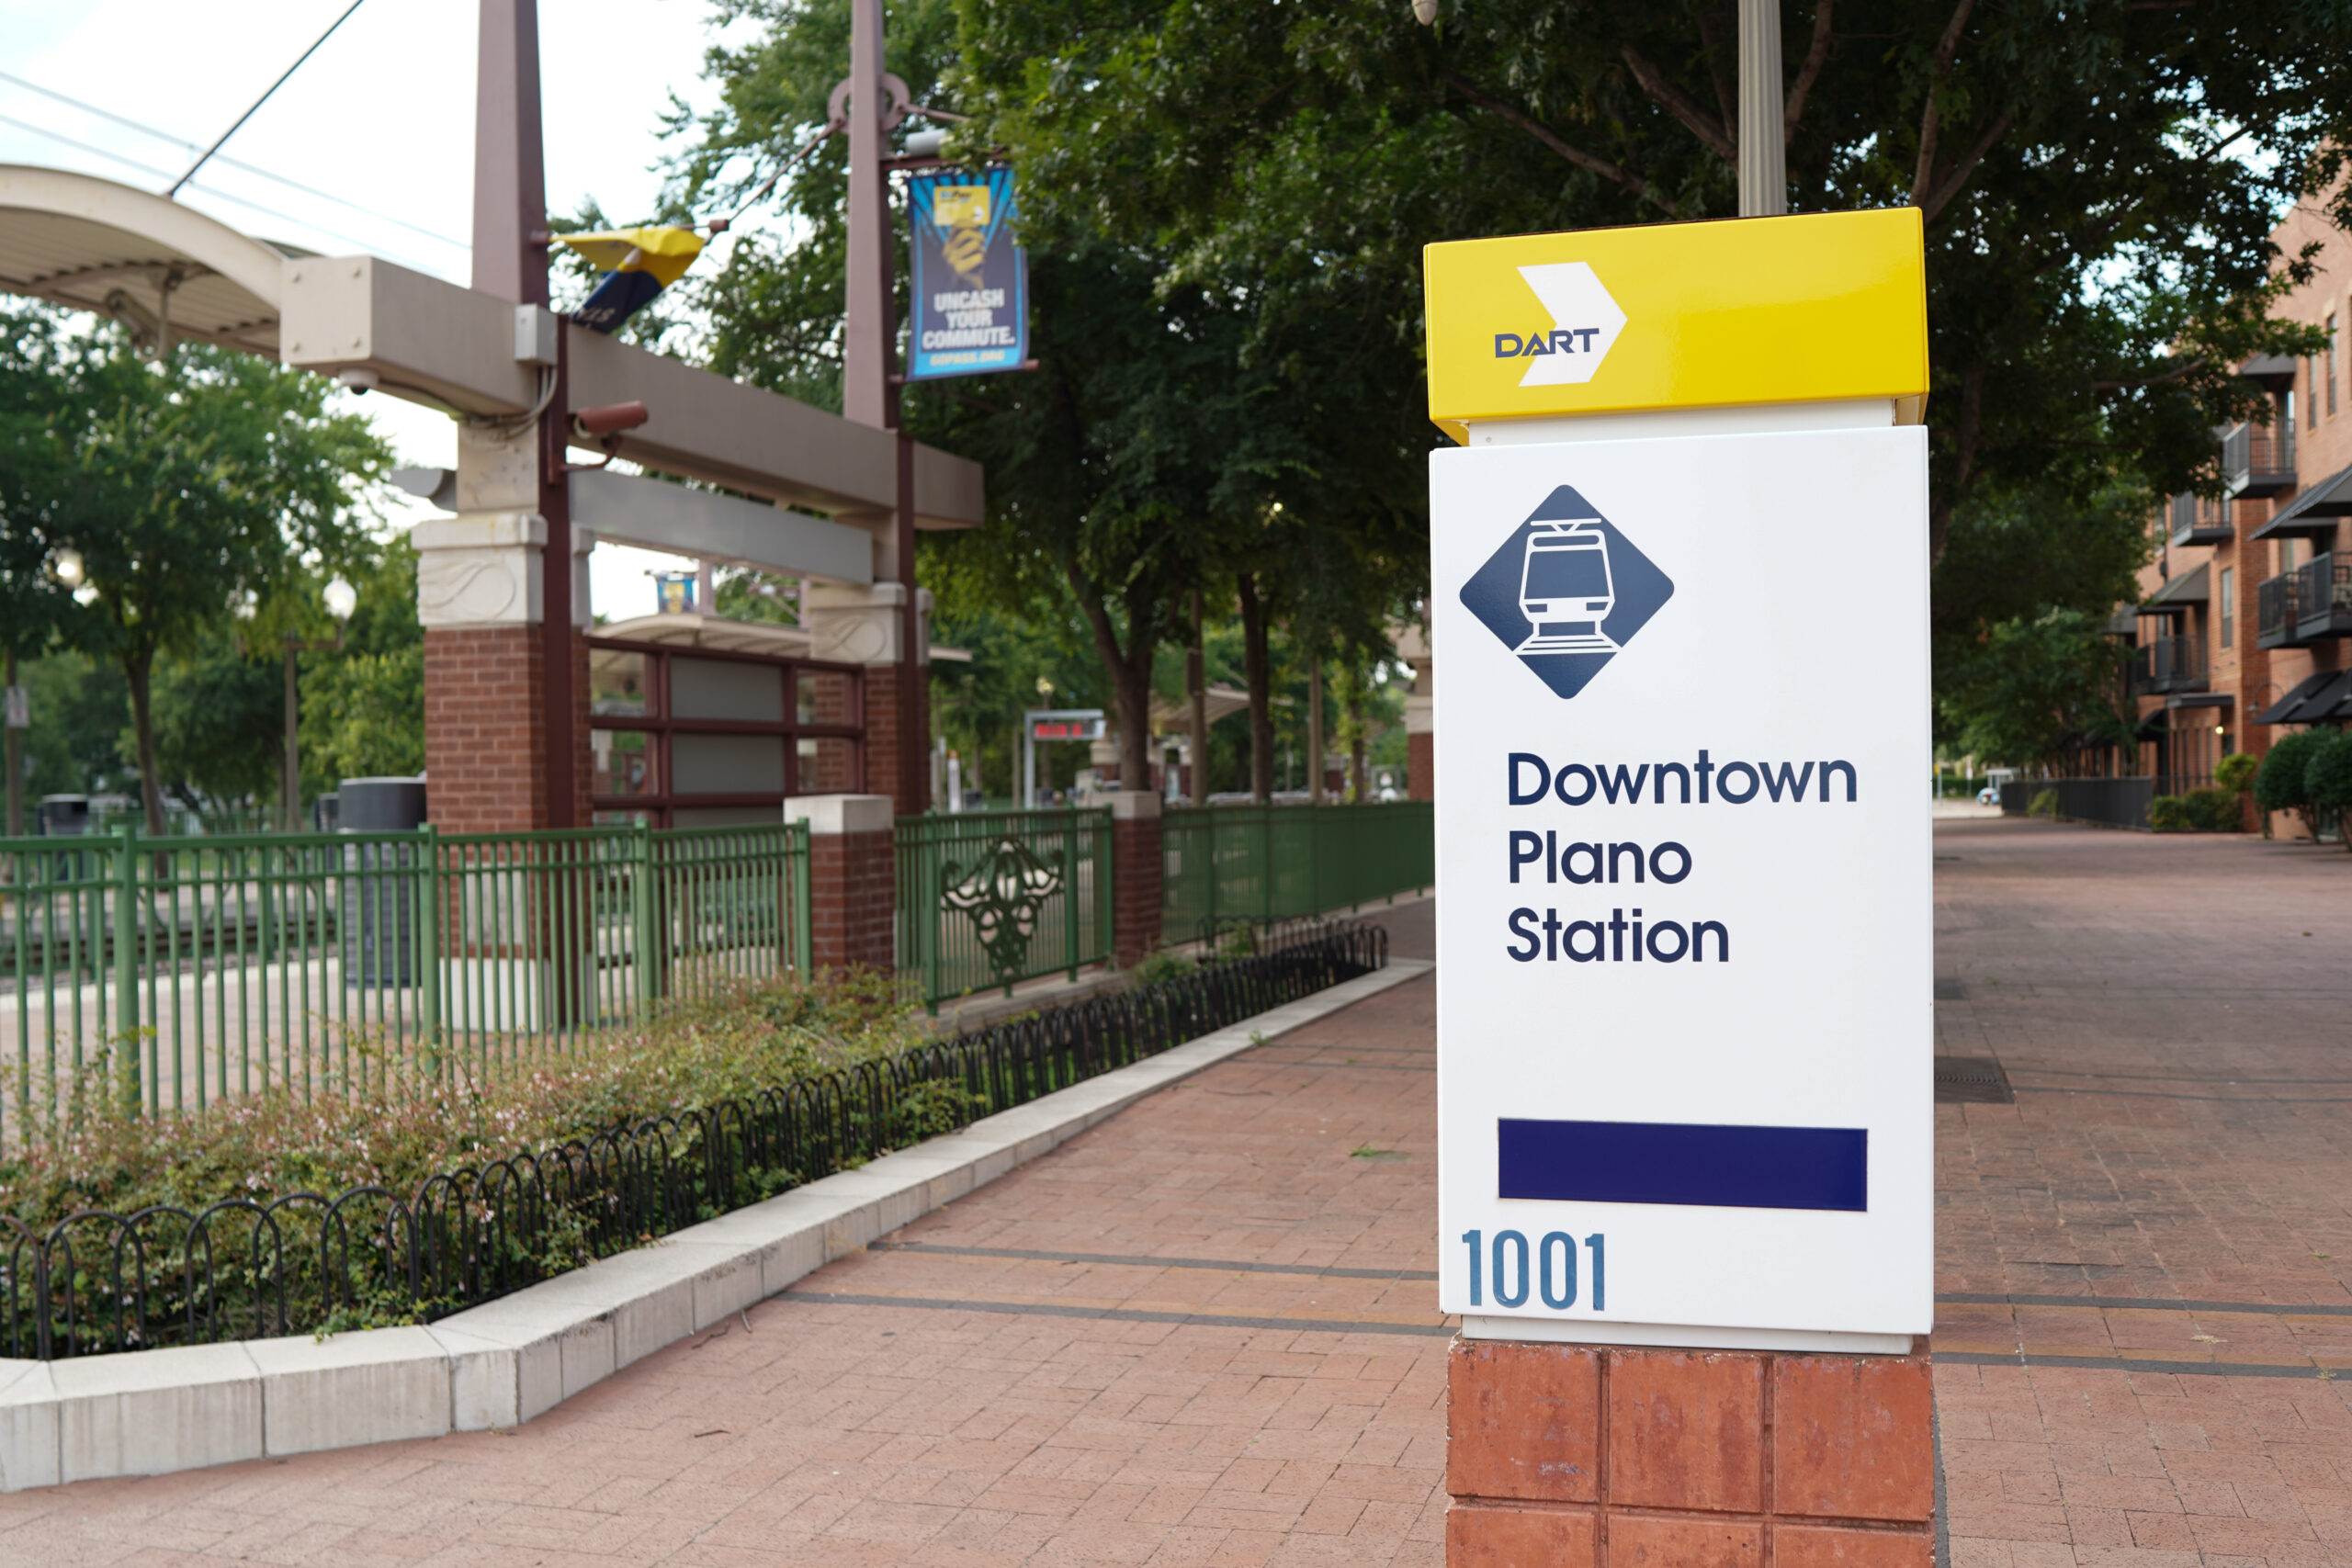 A sign for downtown Plano station, with the DART logo on top, located beside a walkway with greenery and a train platform in the background,